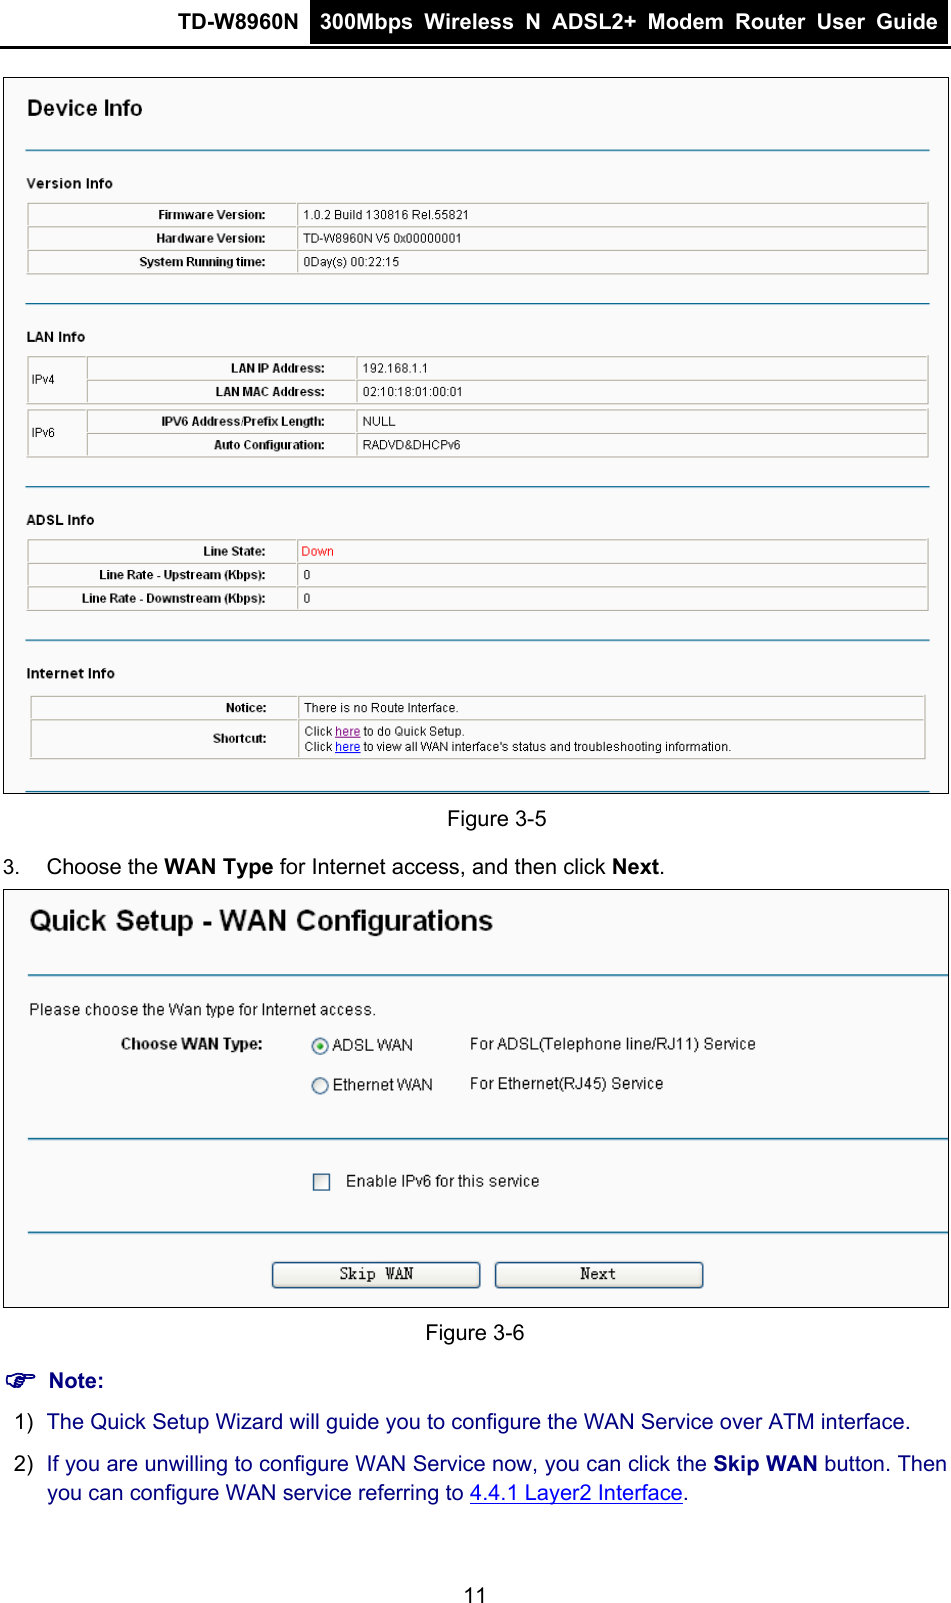 TD-W8960N  300Mbps Wireless N ADSL2+ Modem Router User Guide   Figure 3-5 3.  Choose the WAN Type for Internet access, and then click Next.  Figure 3-6  Note: 1)  The Quick Setup Wizard will guide you to configure the WAN Service over ATM interface. 2)  If you are unwilling to configure WAN Service now, you can click the Skip WAN button. Then you can configure WAN service referring to 4.4.1 Layer2 Interface. 11 